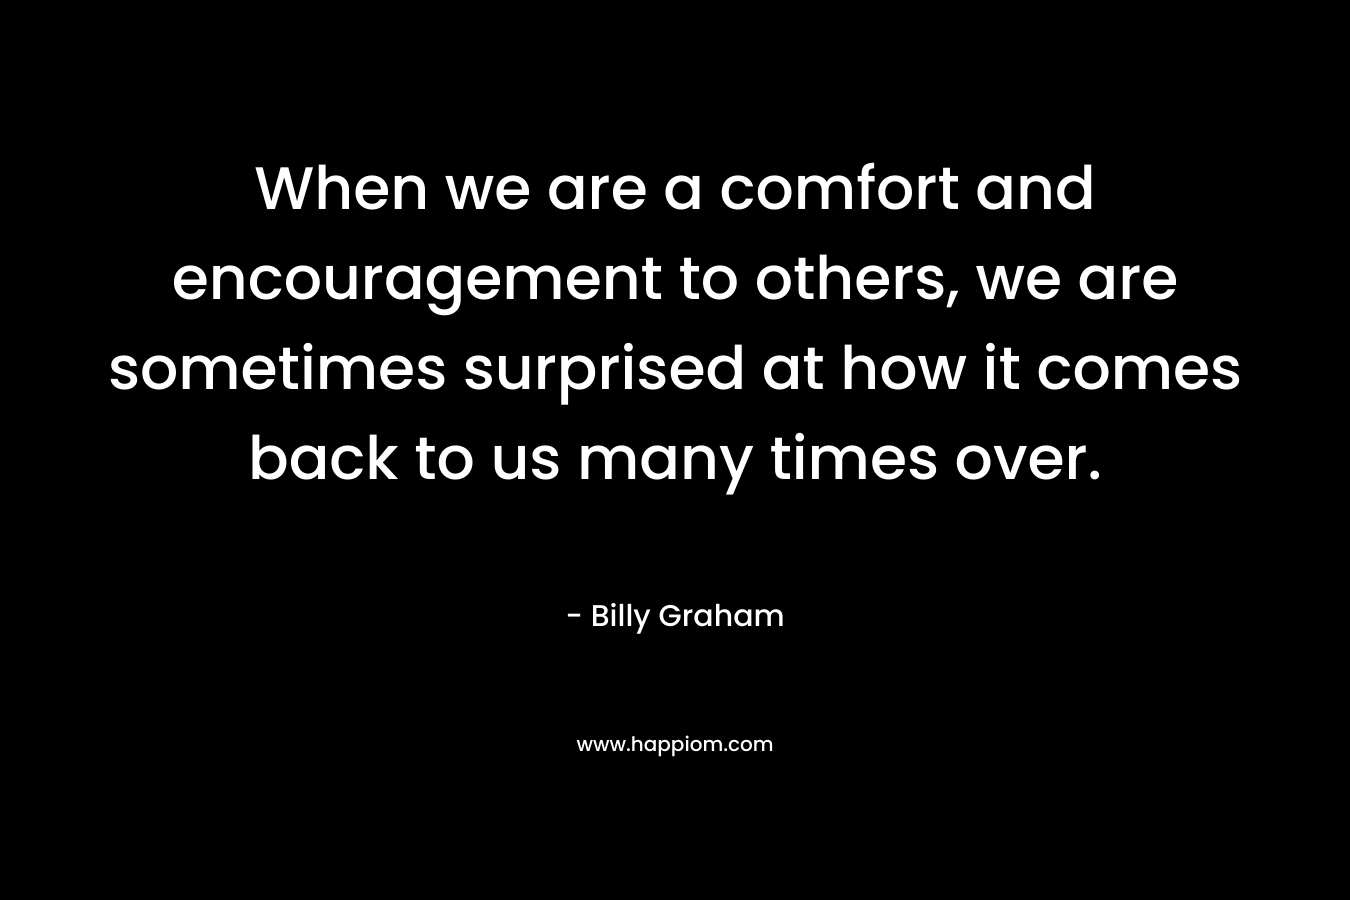 When we are a comfort and encouragement to others, we are sometimes surprised at how it comes back to us many times over.